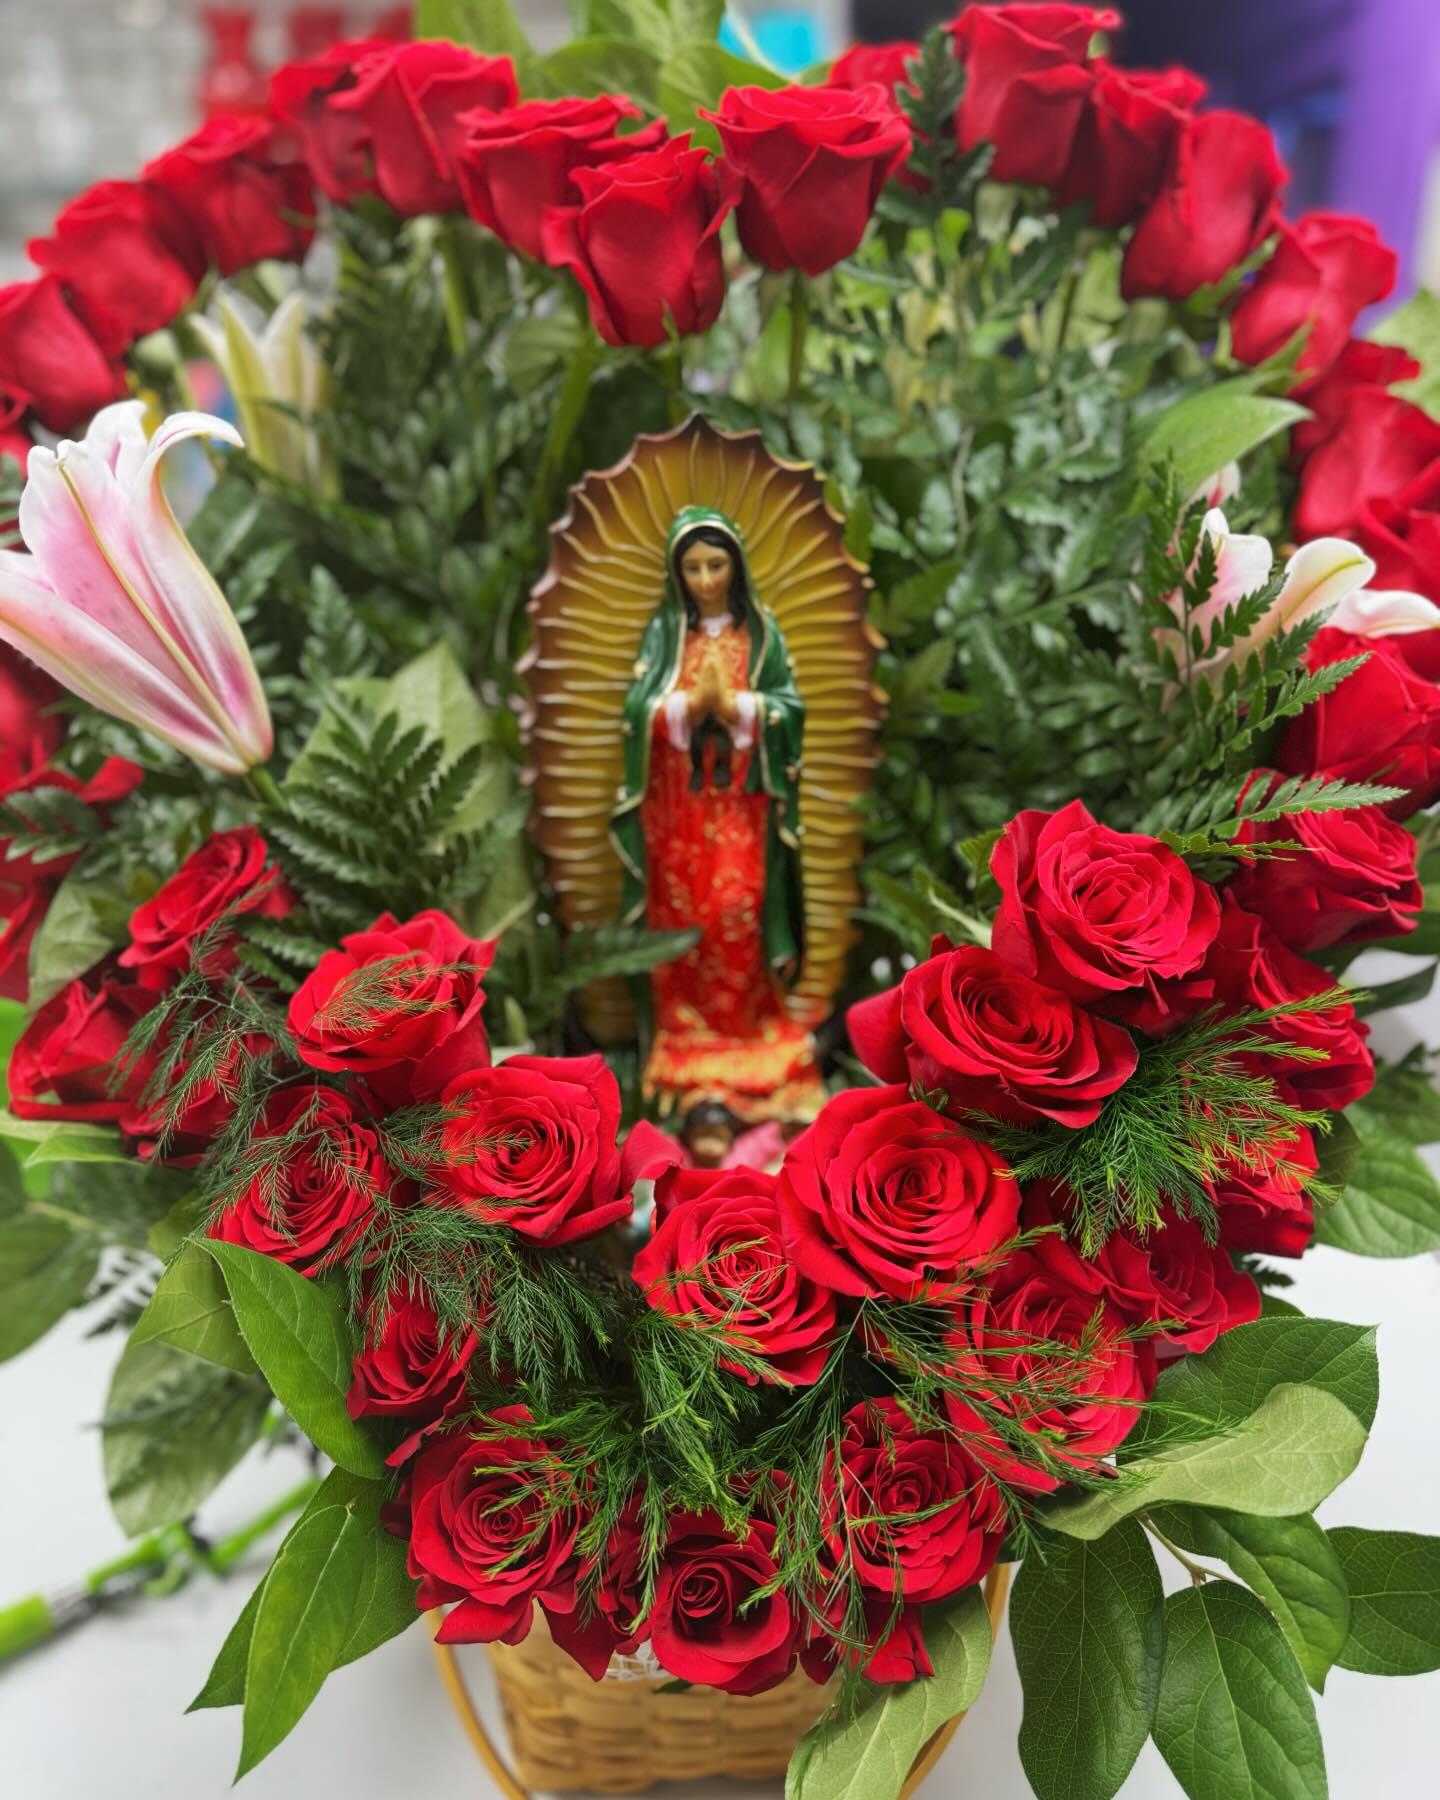 Tomorrow, December 12th, is the Feast of our Lady Guadalupe or Dia de la Virgen de Guadalupe. Stop in and get your roses to honor her.